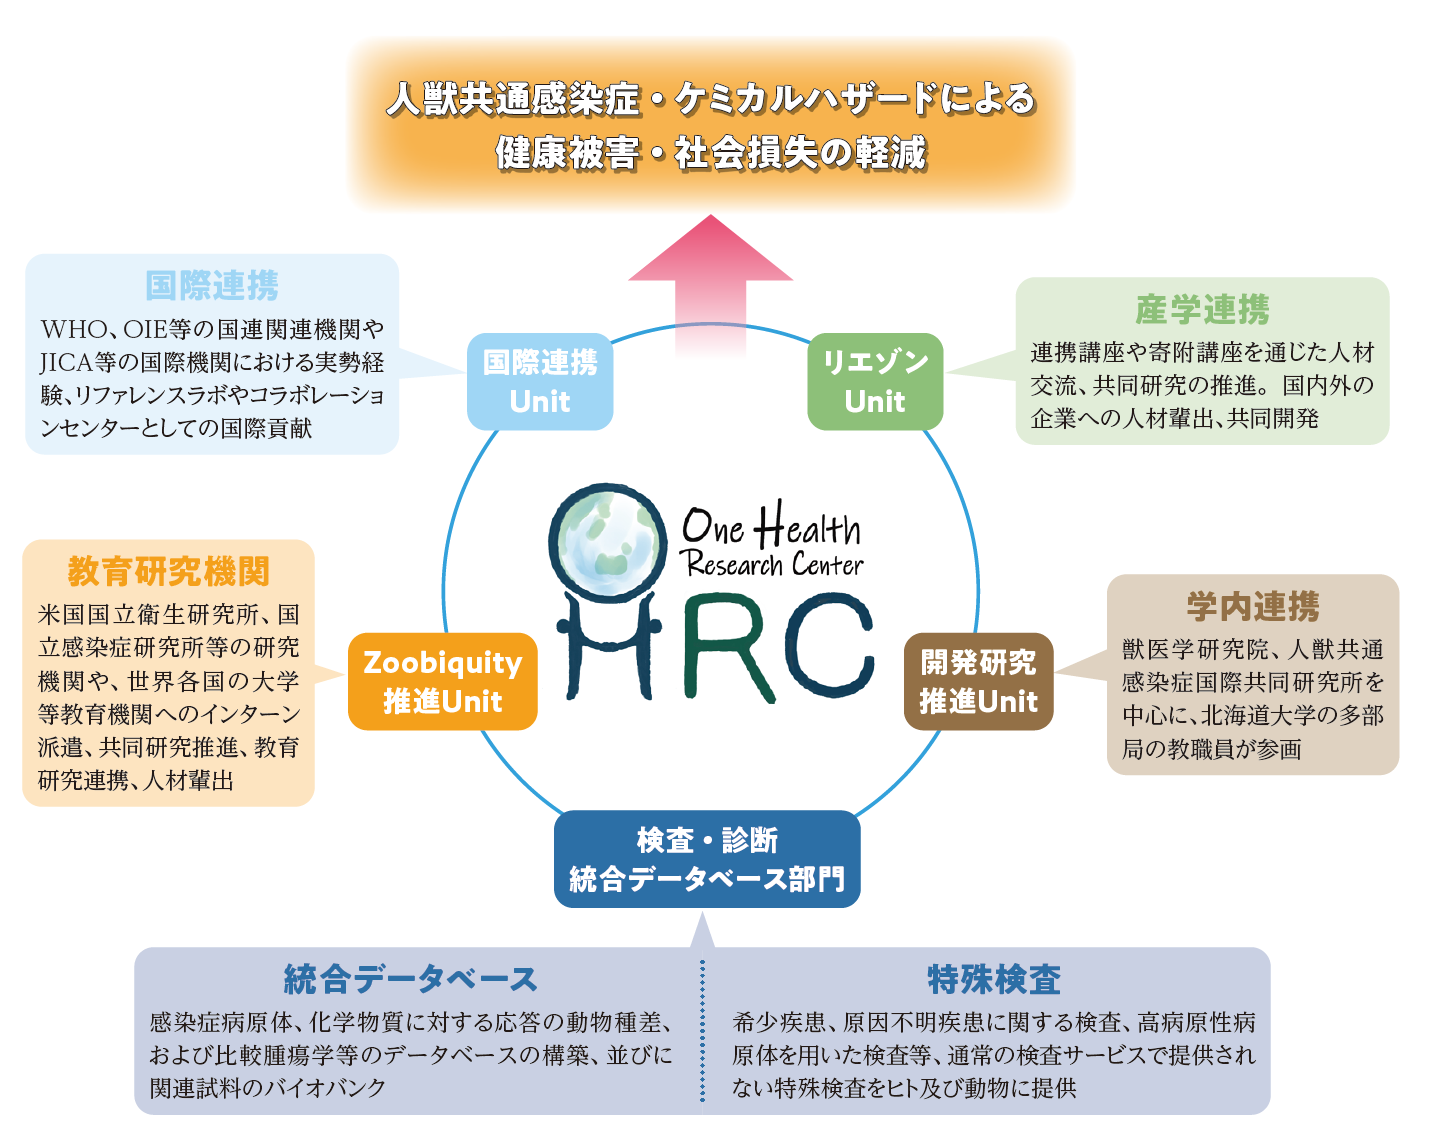 One Health Research Center (OHRC)説明図①